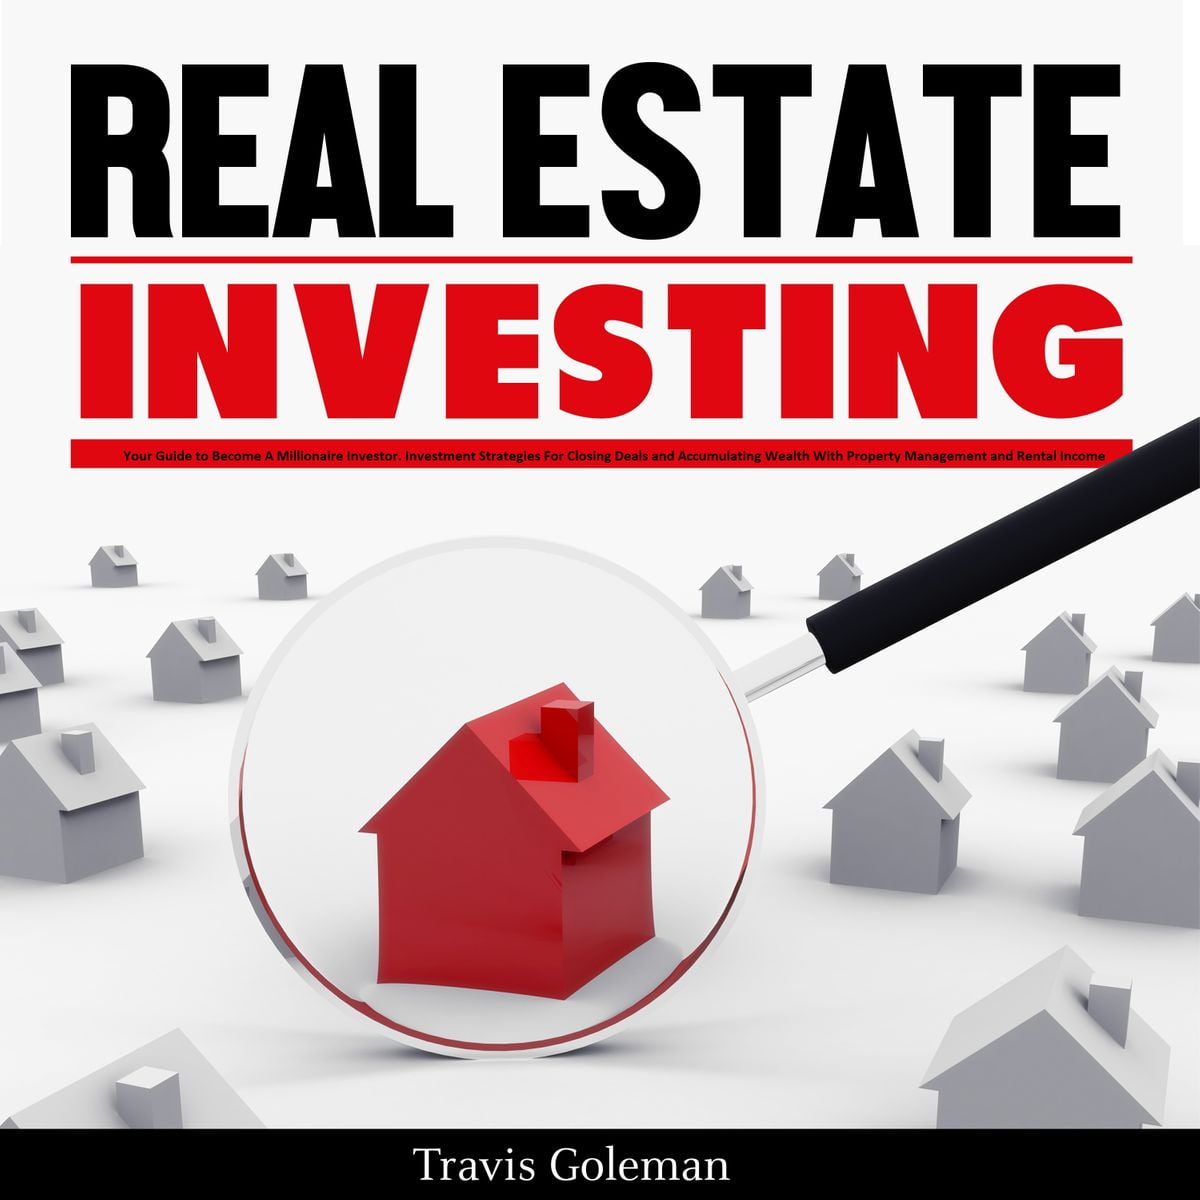 Real Estate Investing Your Guide To Become A Millionaire Investor Investment Strategies For Closing Deals And Accumulating Wealth With Property Management And Rental Income Audiobook Walmart Com Walmart Com